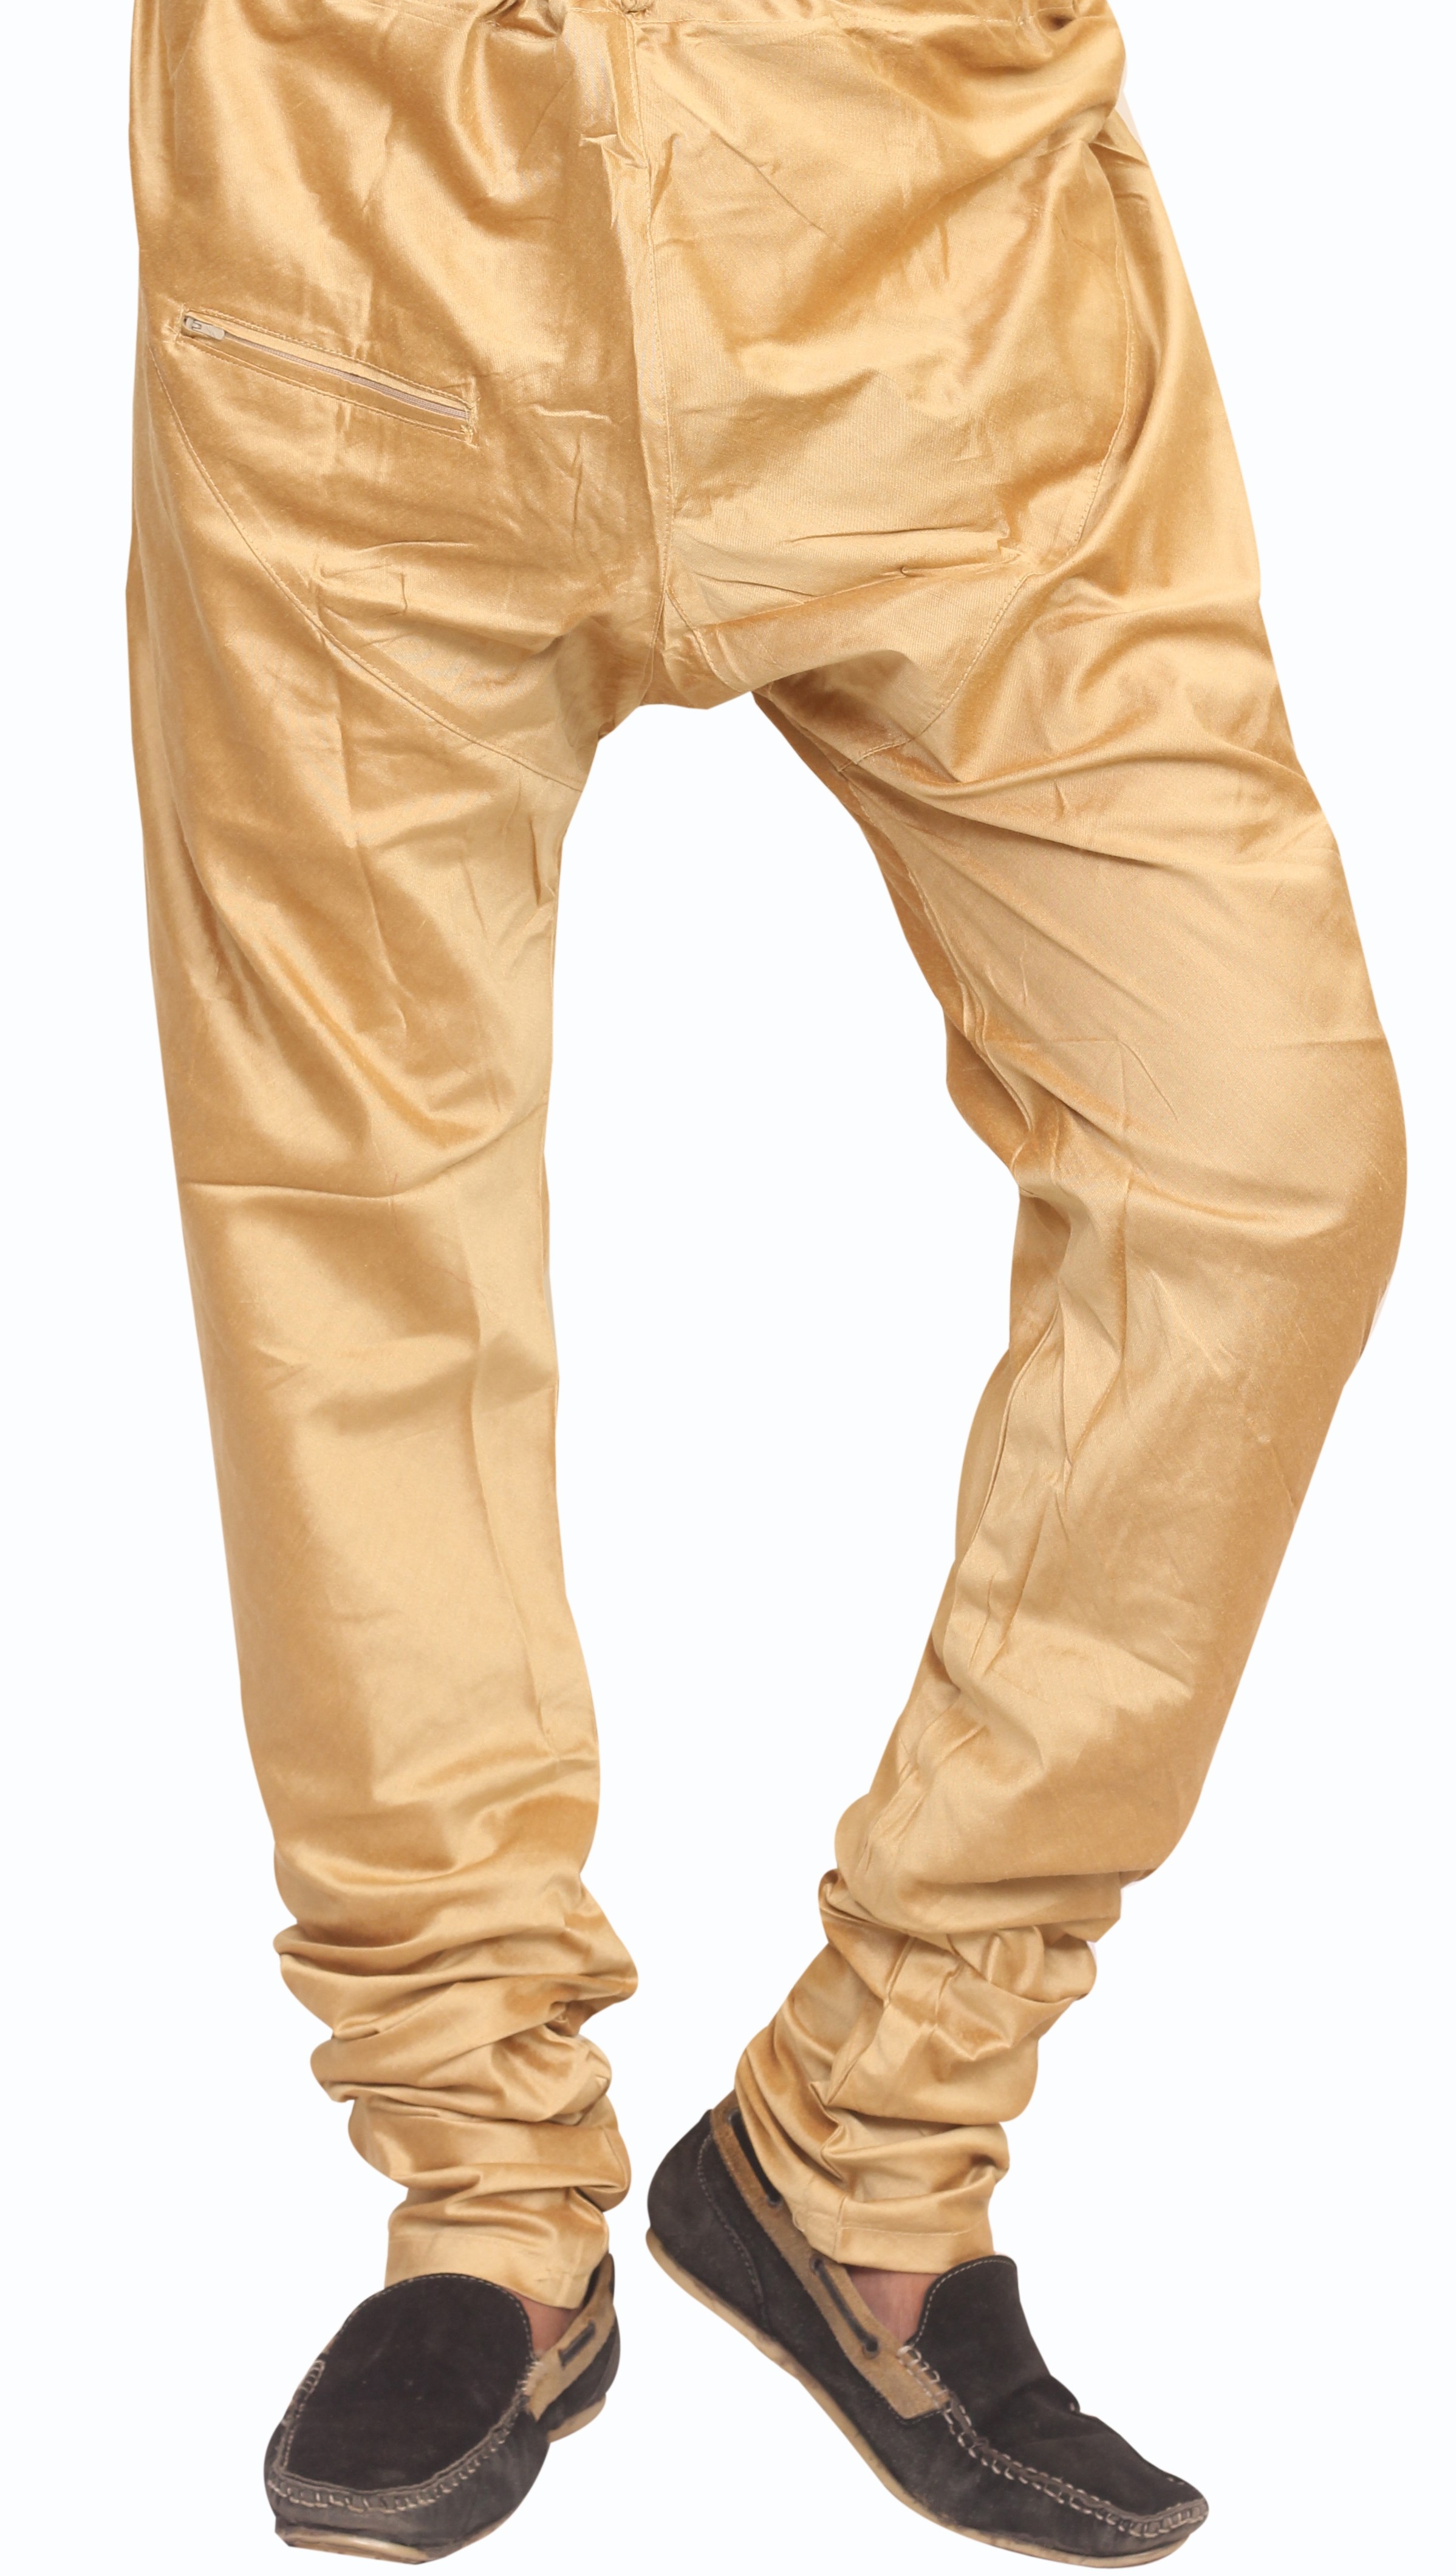 Sreemant | Sreemant Comfortable Brown Churidar Pajama For Men With Draw-String, PCHPS22-BWN